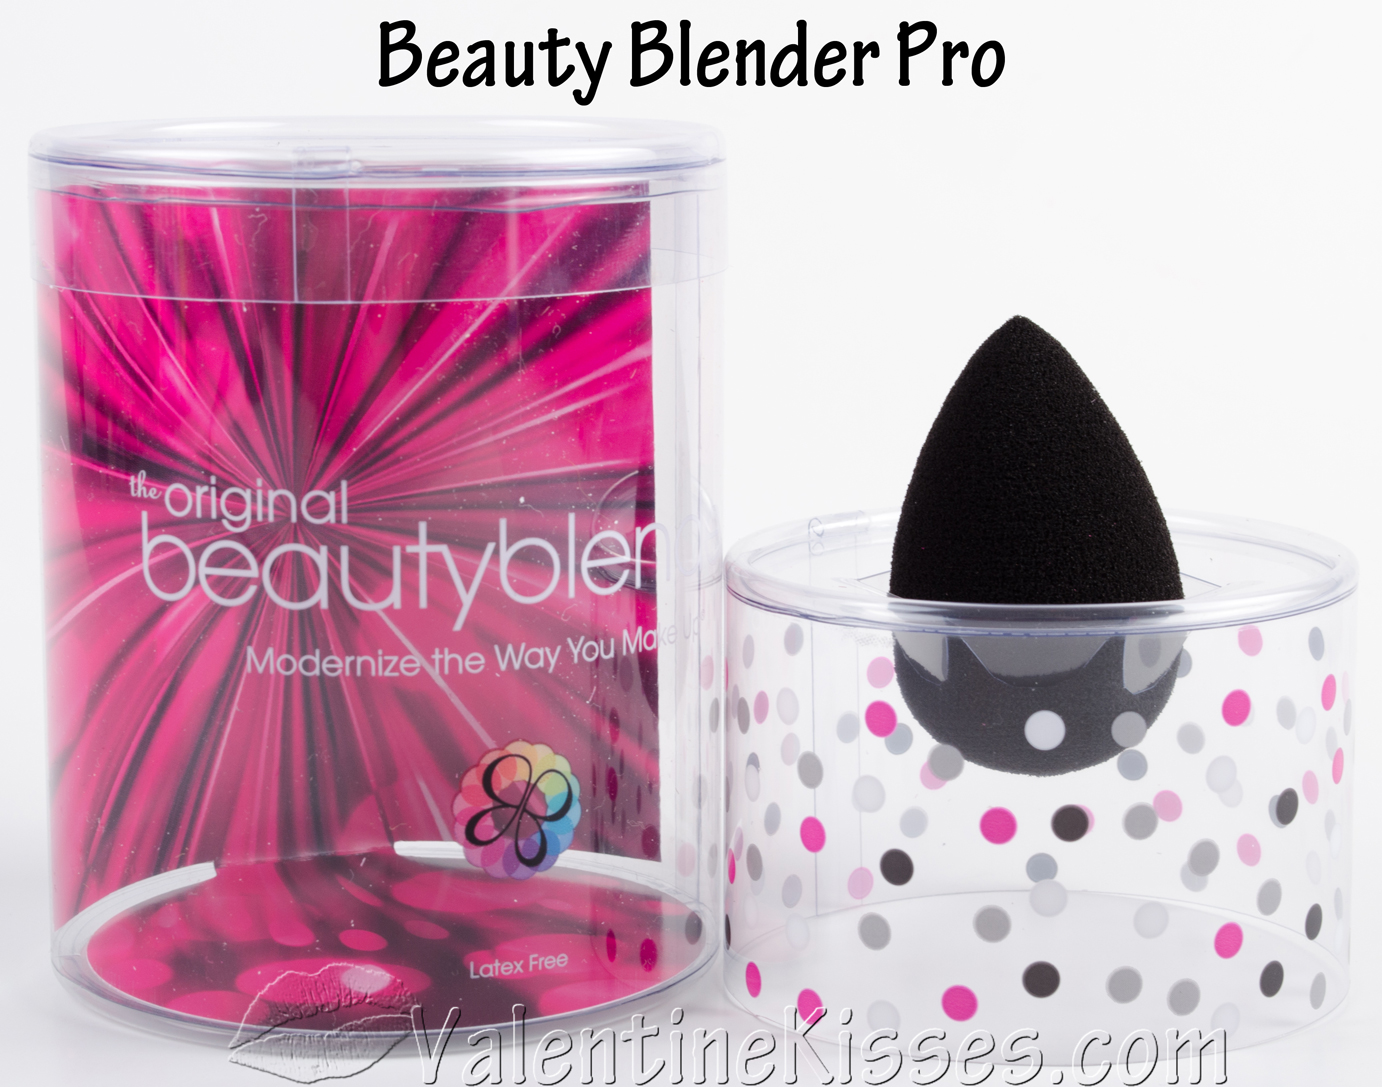 Shipley brysomme maling Valentine Kisses: Beauty Blender Pro - pics, review